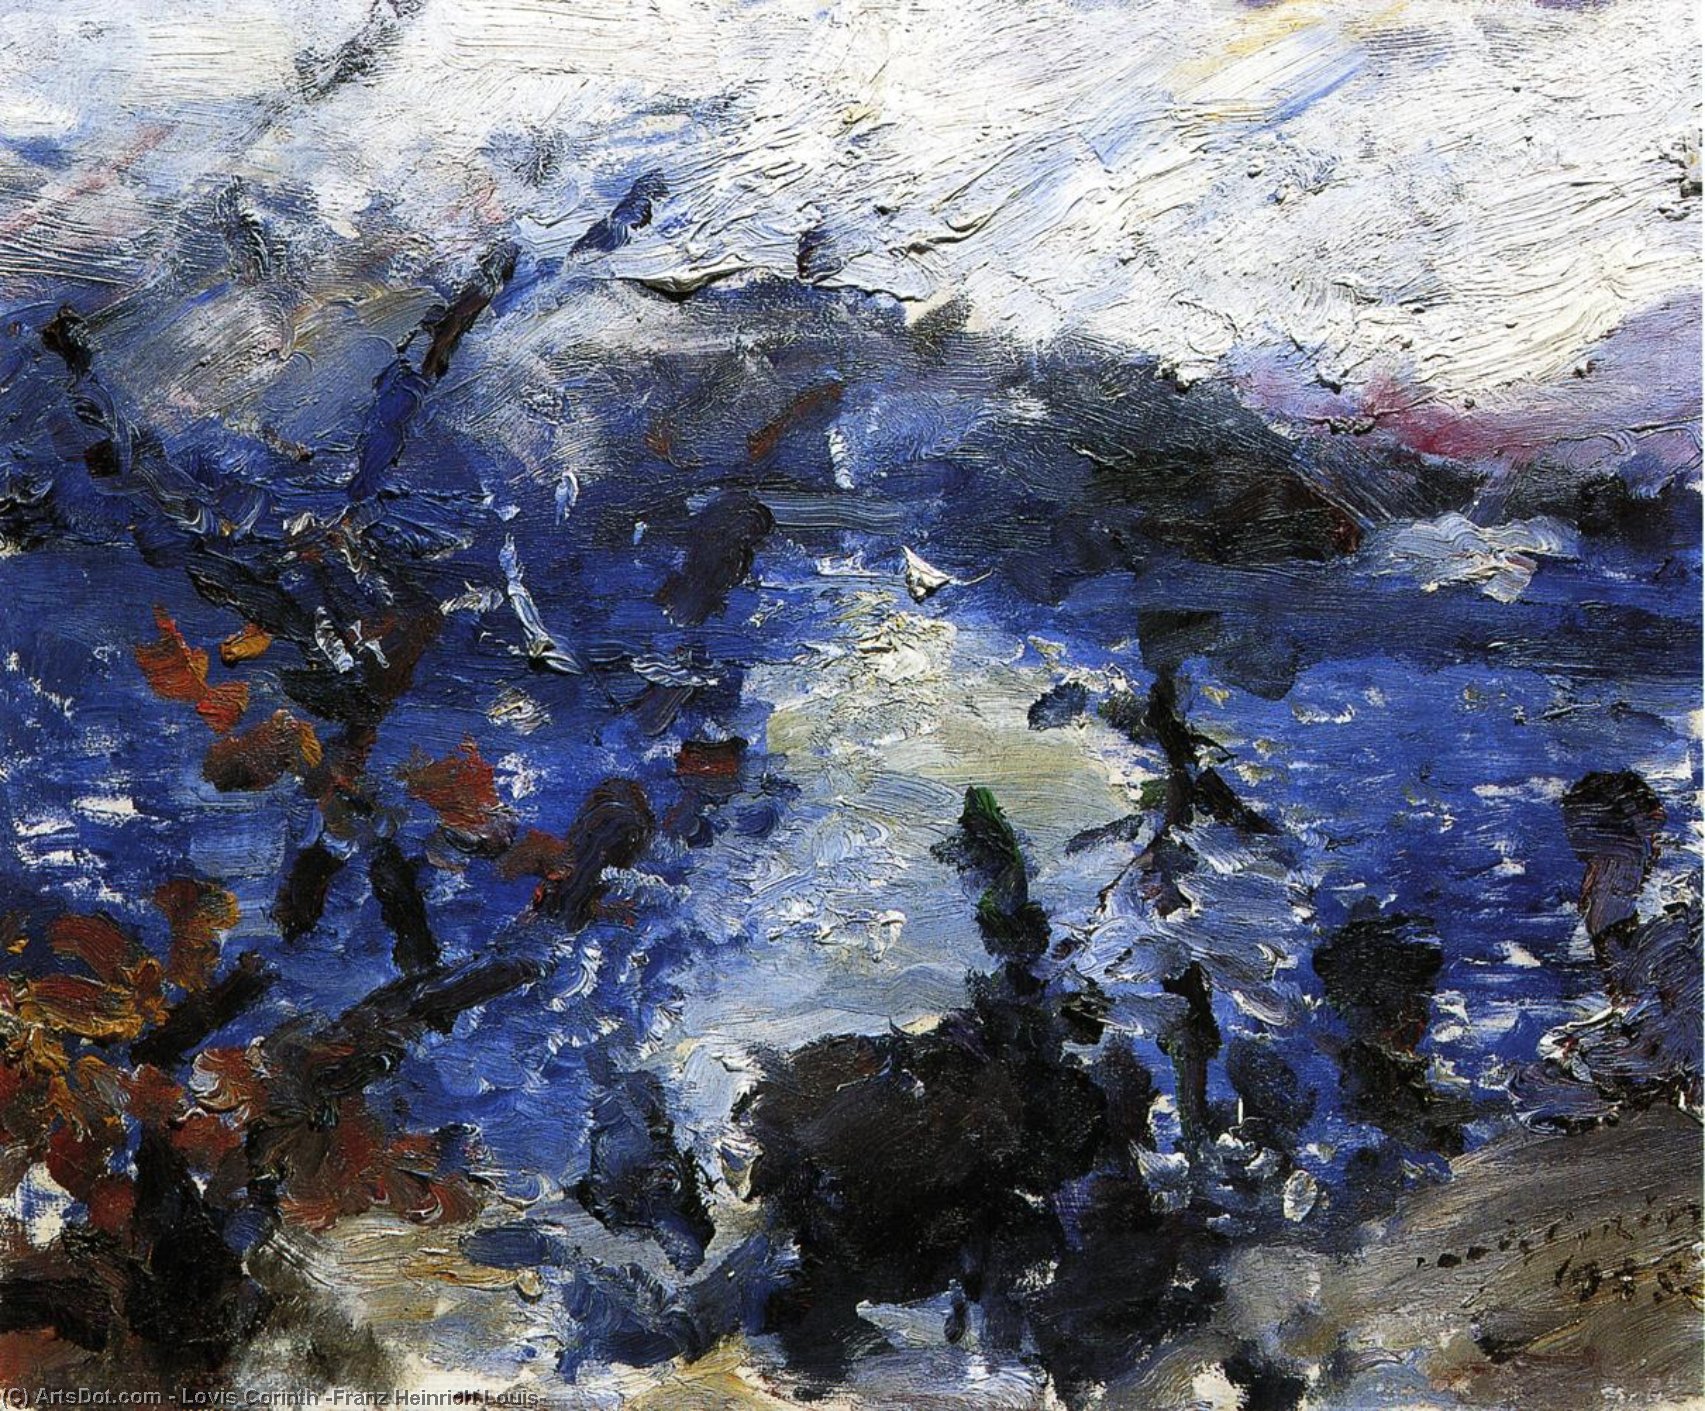 WikiOO.org - Encyclopedia of Fine Arts - Lukisan, Artwork Lovis Corinth (Franz Heinrich Louis) - The Walchensee, Mountains Wreathed in Cloud